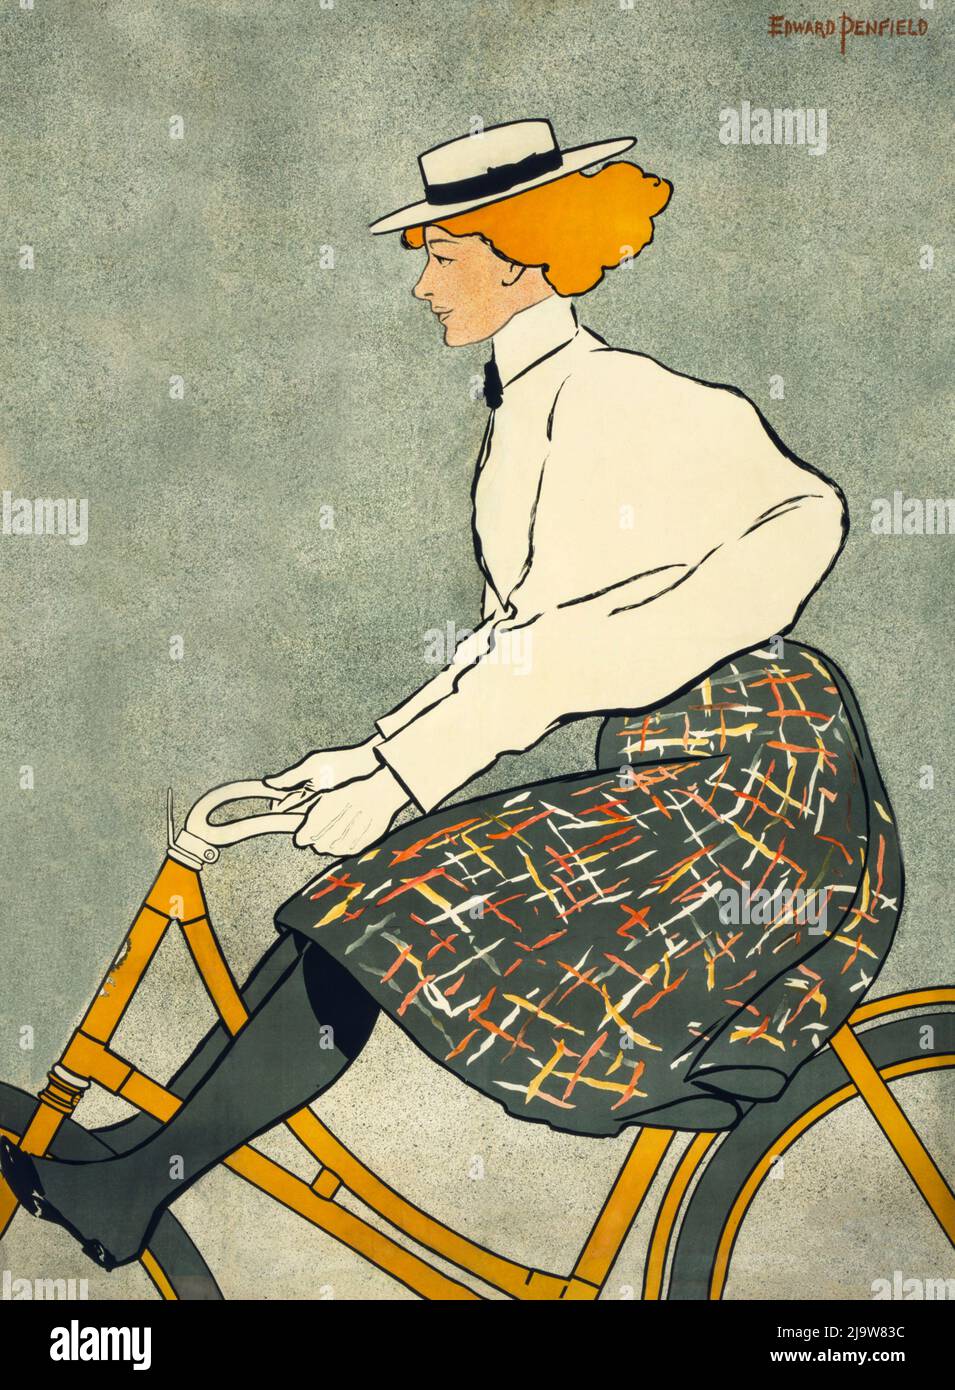 The illustration of a woman on a bicycle by Edward Penfield (1866-1925) is a modified detail from a 1895 poster advertising Stearns Bicycles of New York, USA. Stock Photo